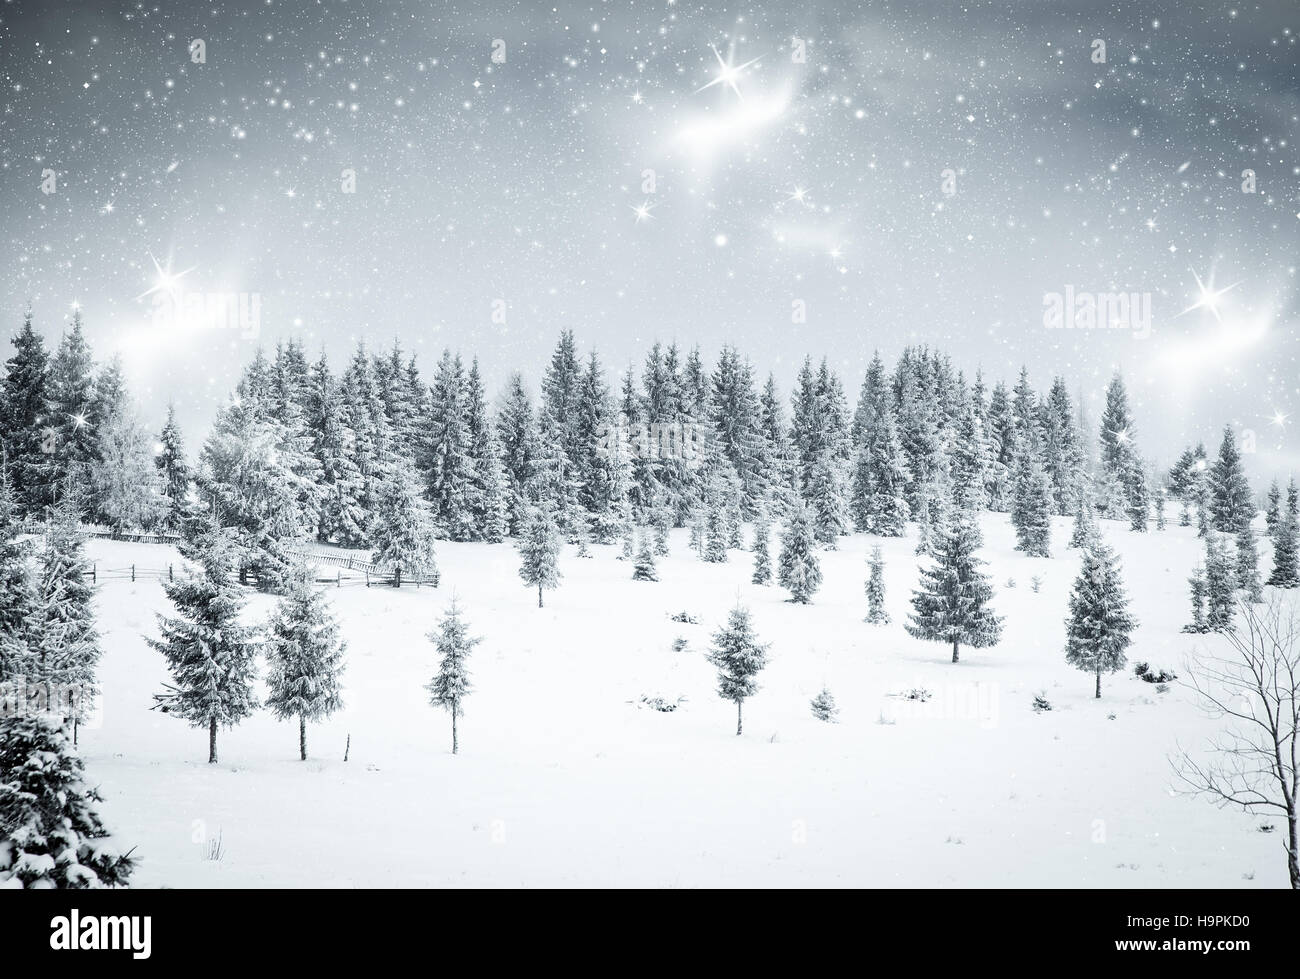 Christmas background with snowy fir trees Stock Photo